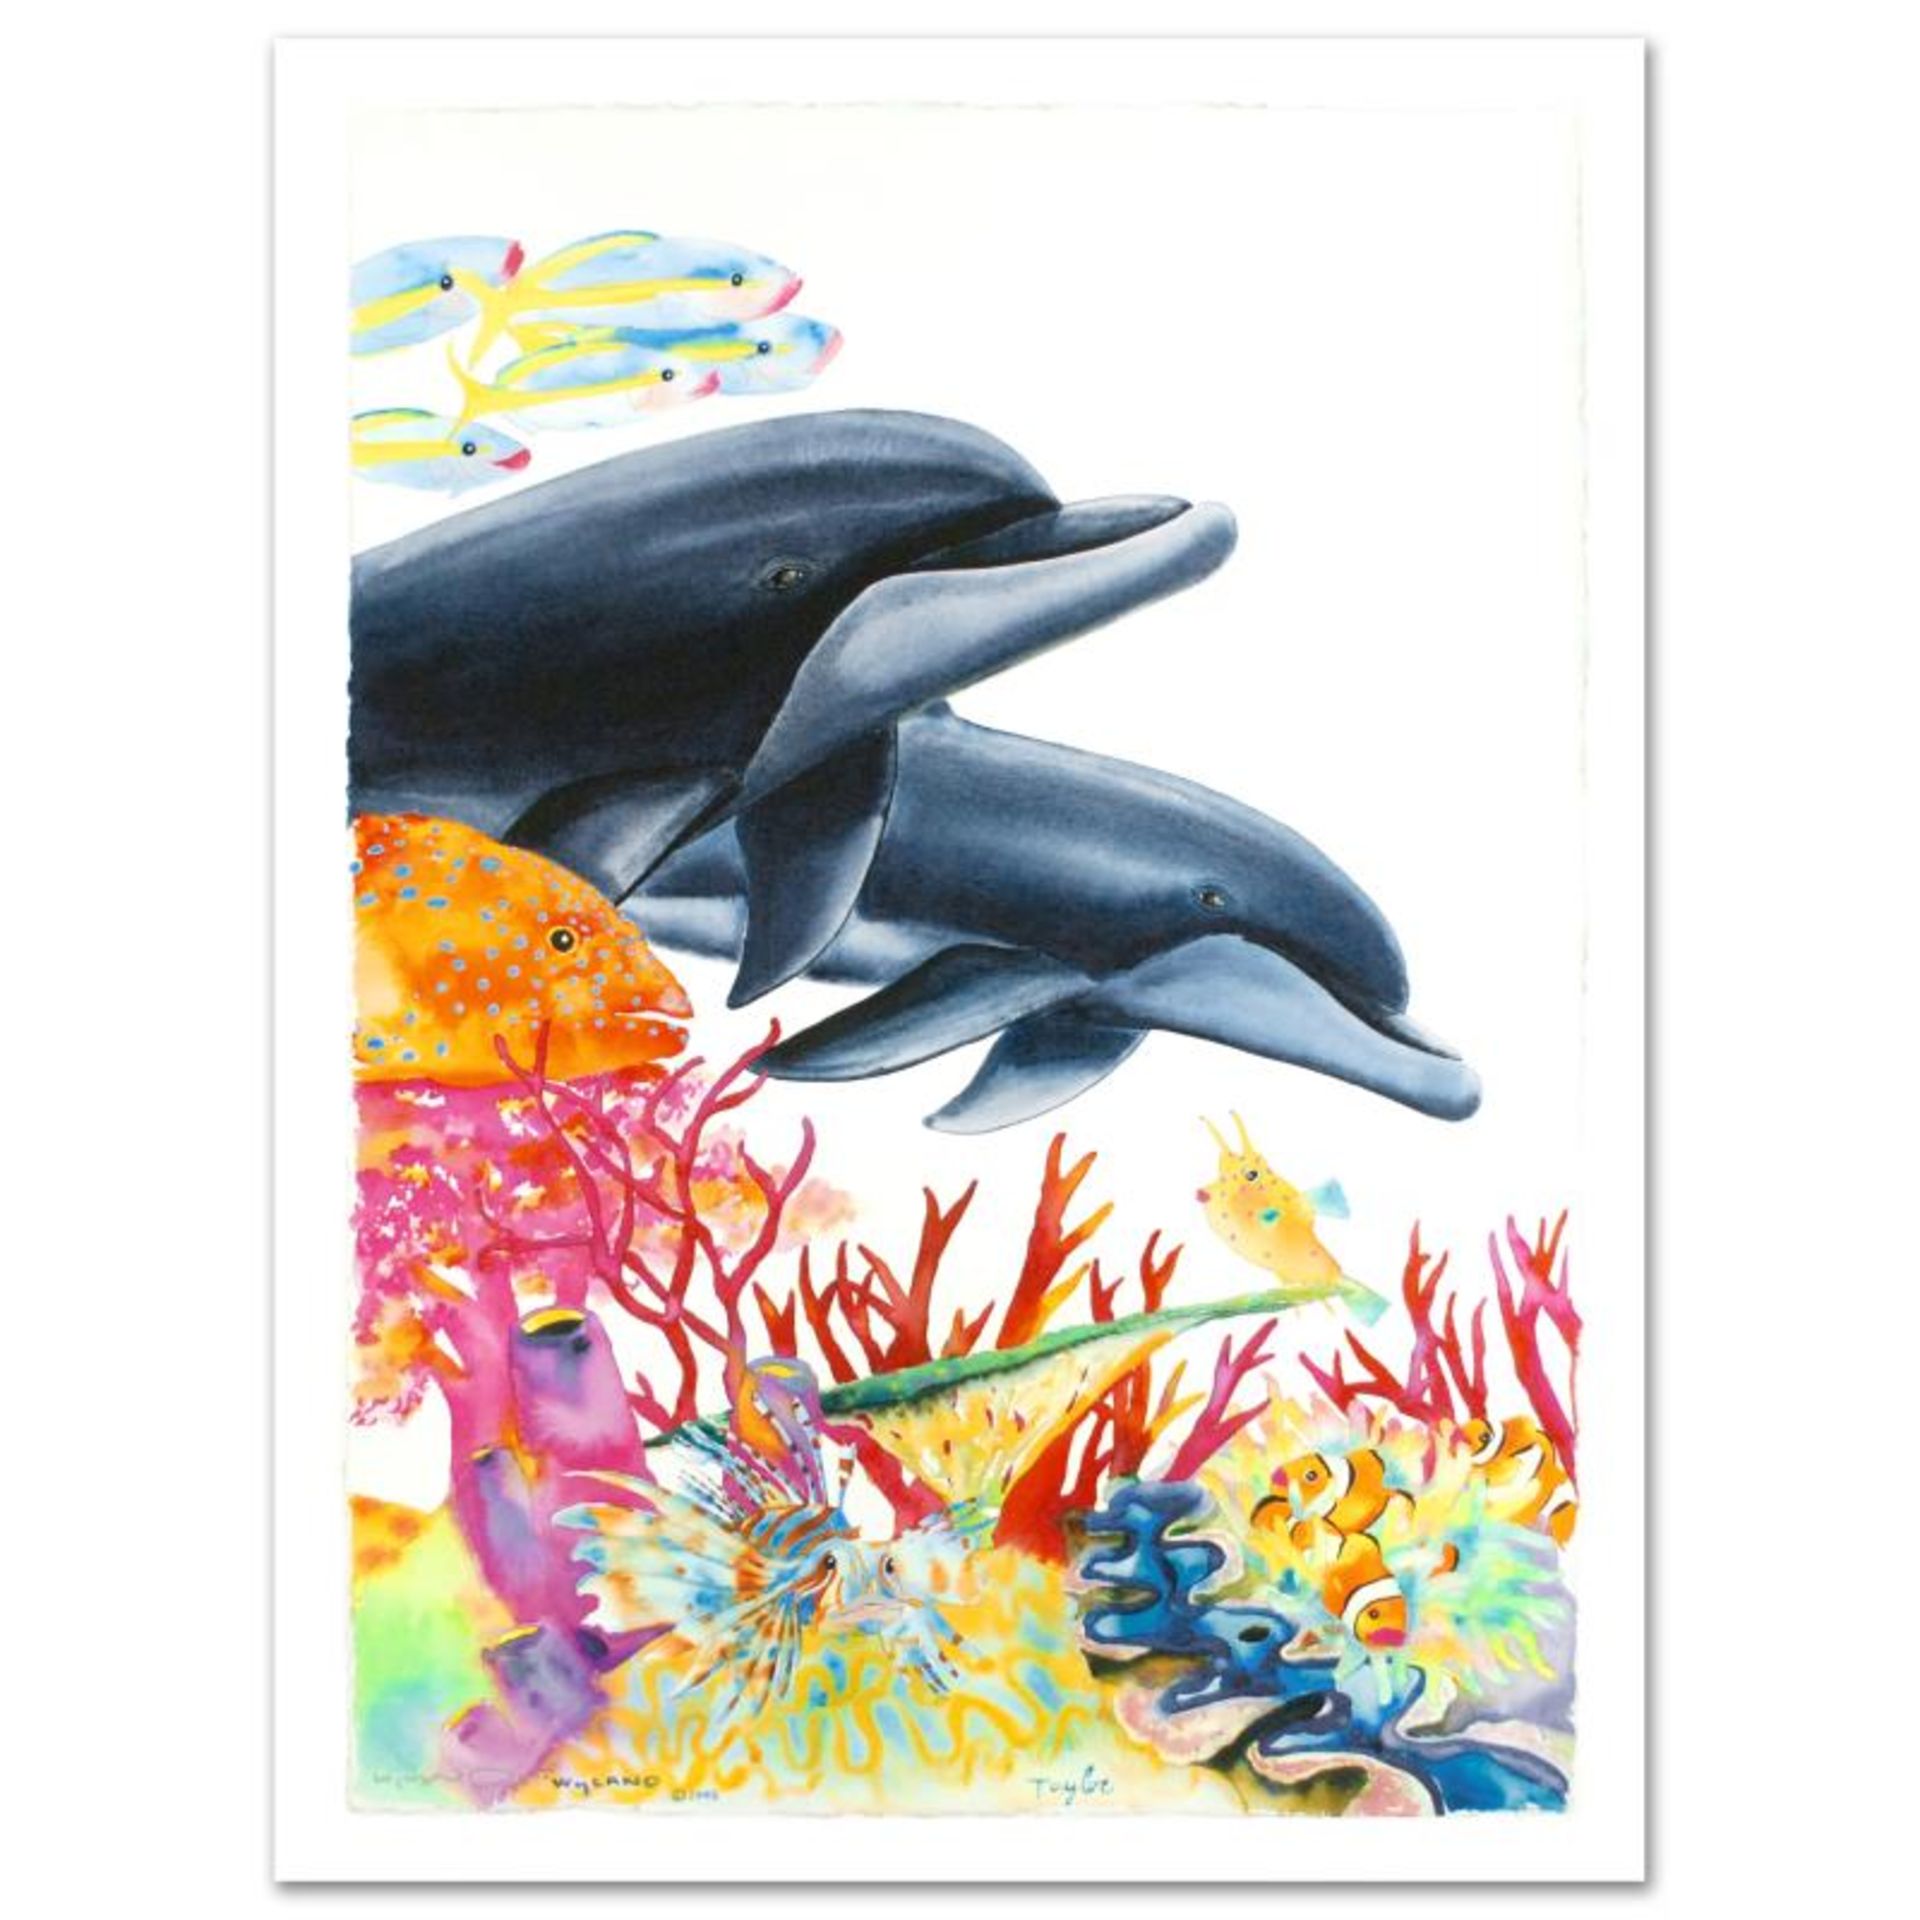 "Sea of Color" Limited Edition Giclee on Canvas (29.5" x 41.5") by Wyland, Numbe